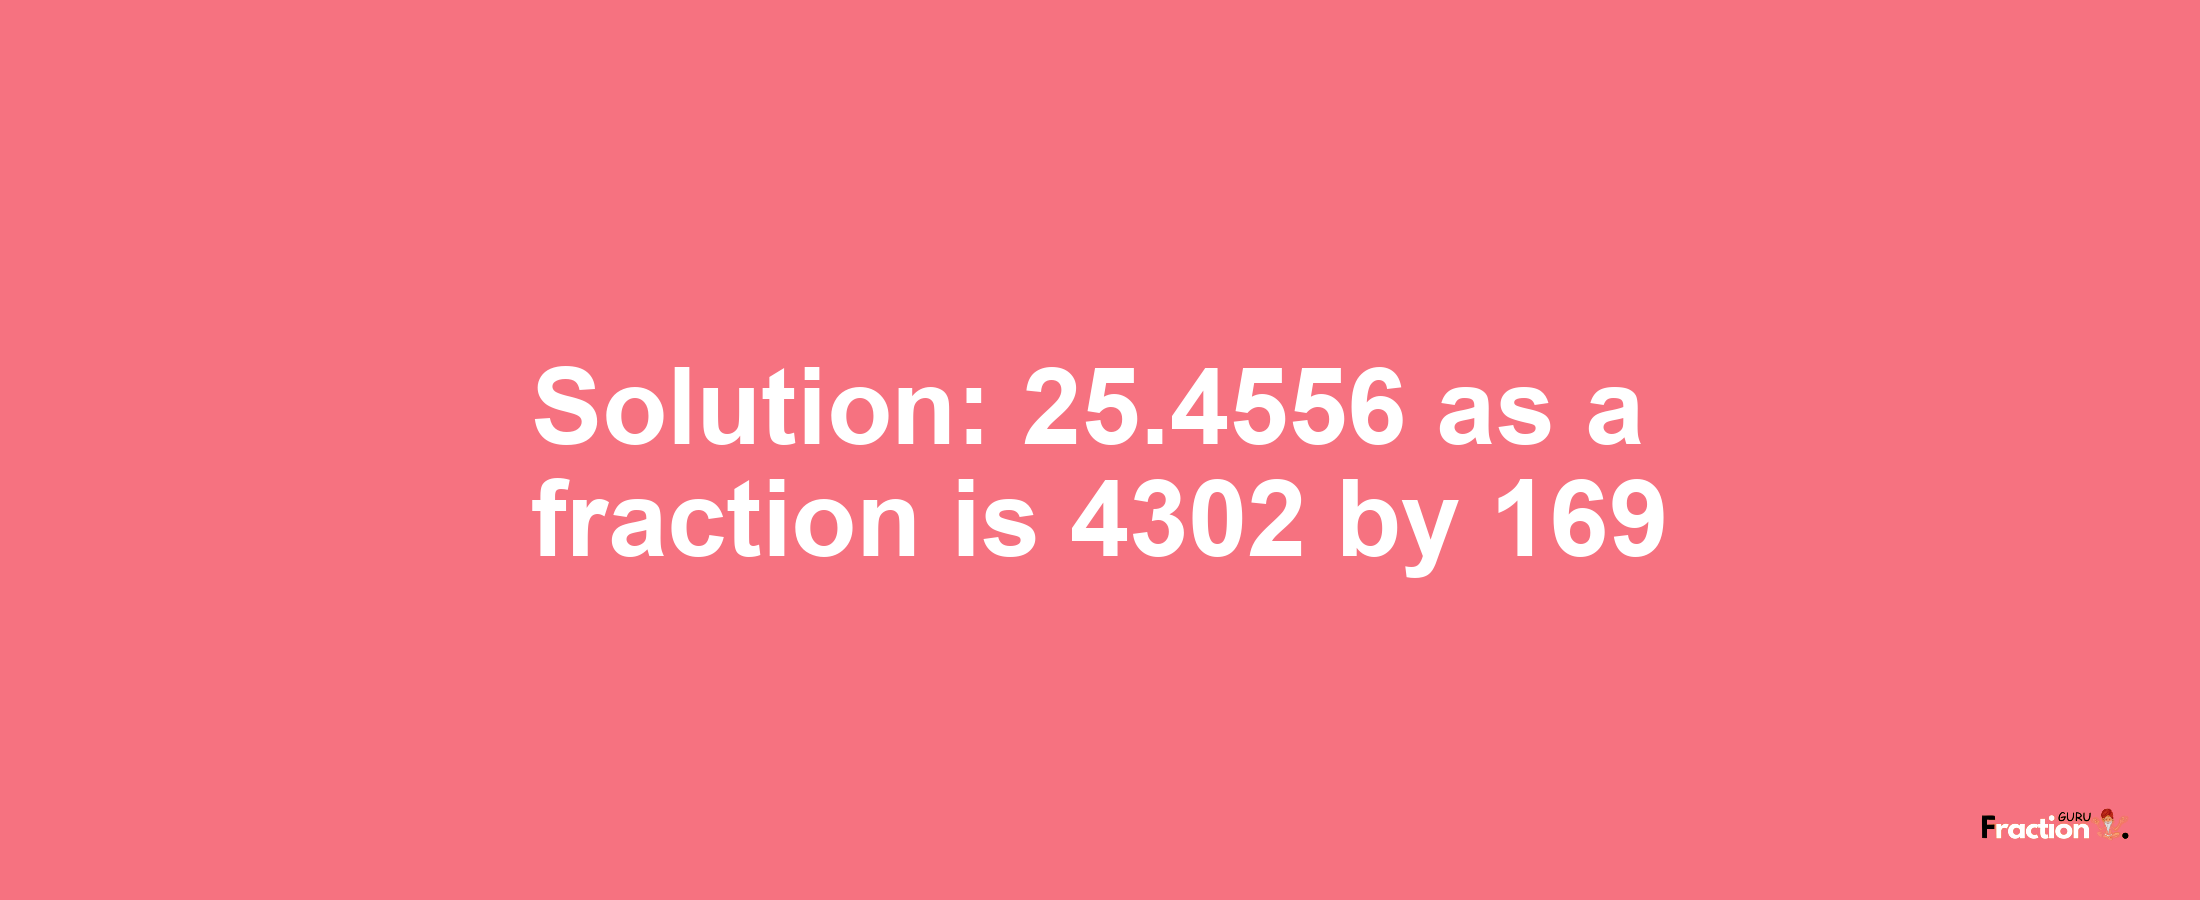 Solution:25.4556 as a fraction is 4302/169